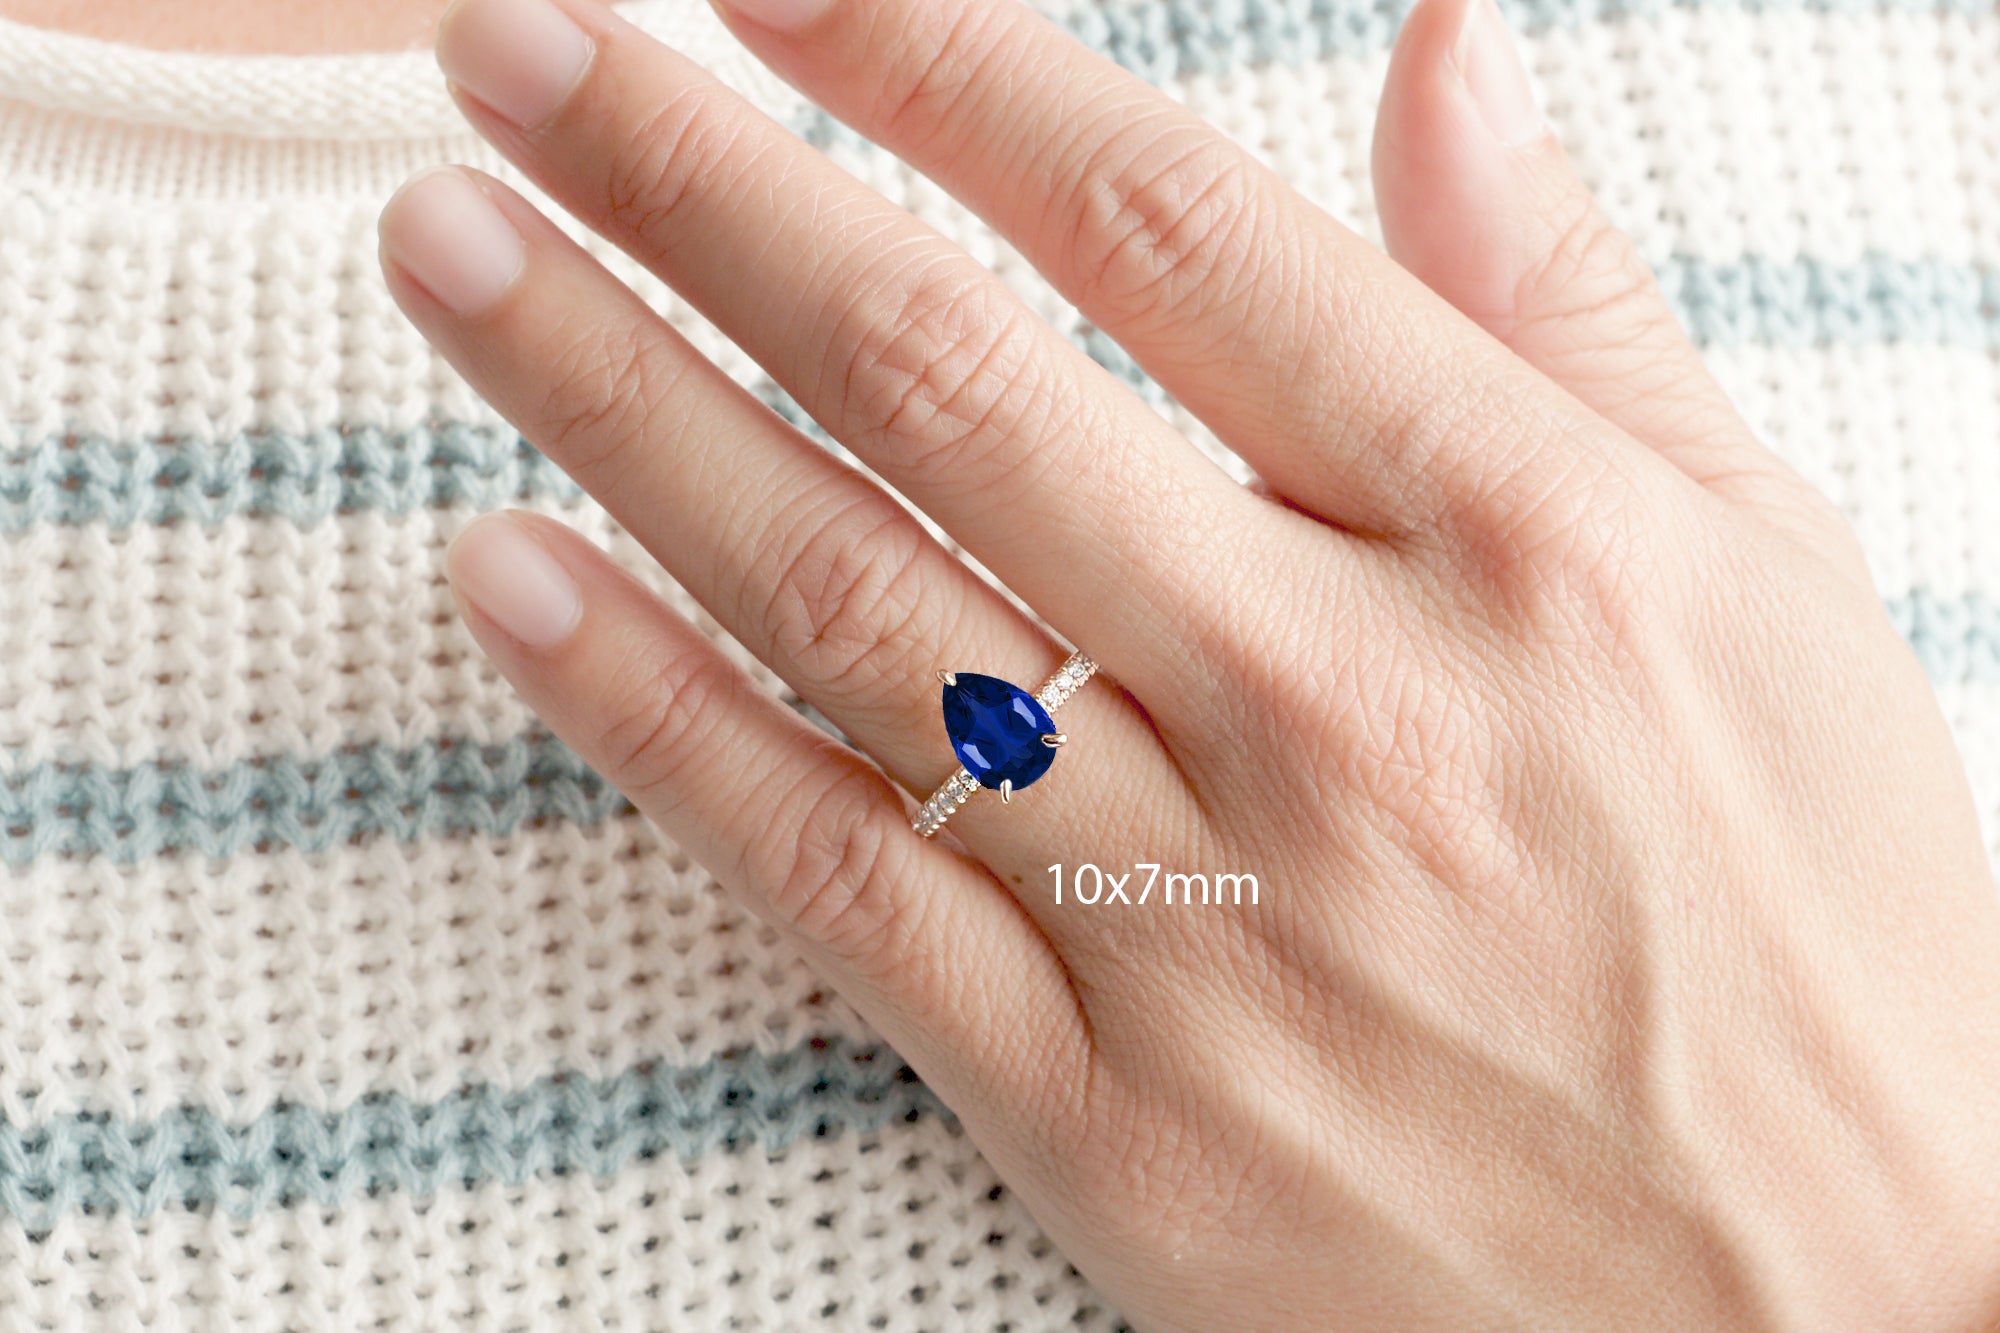 The Ava Pear Sapphire Ring (Lab-Grown)